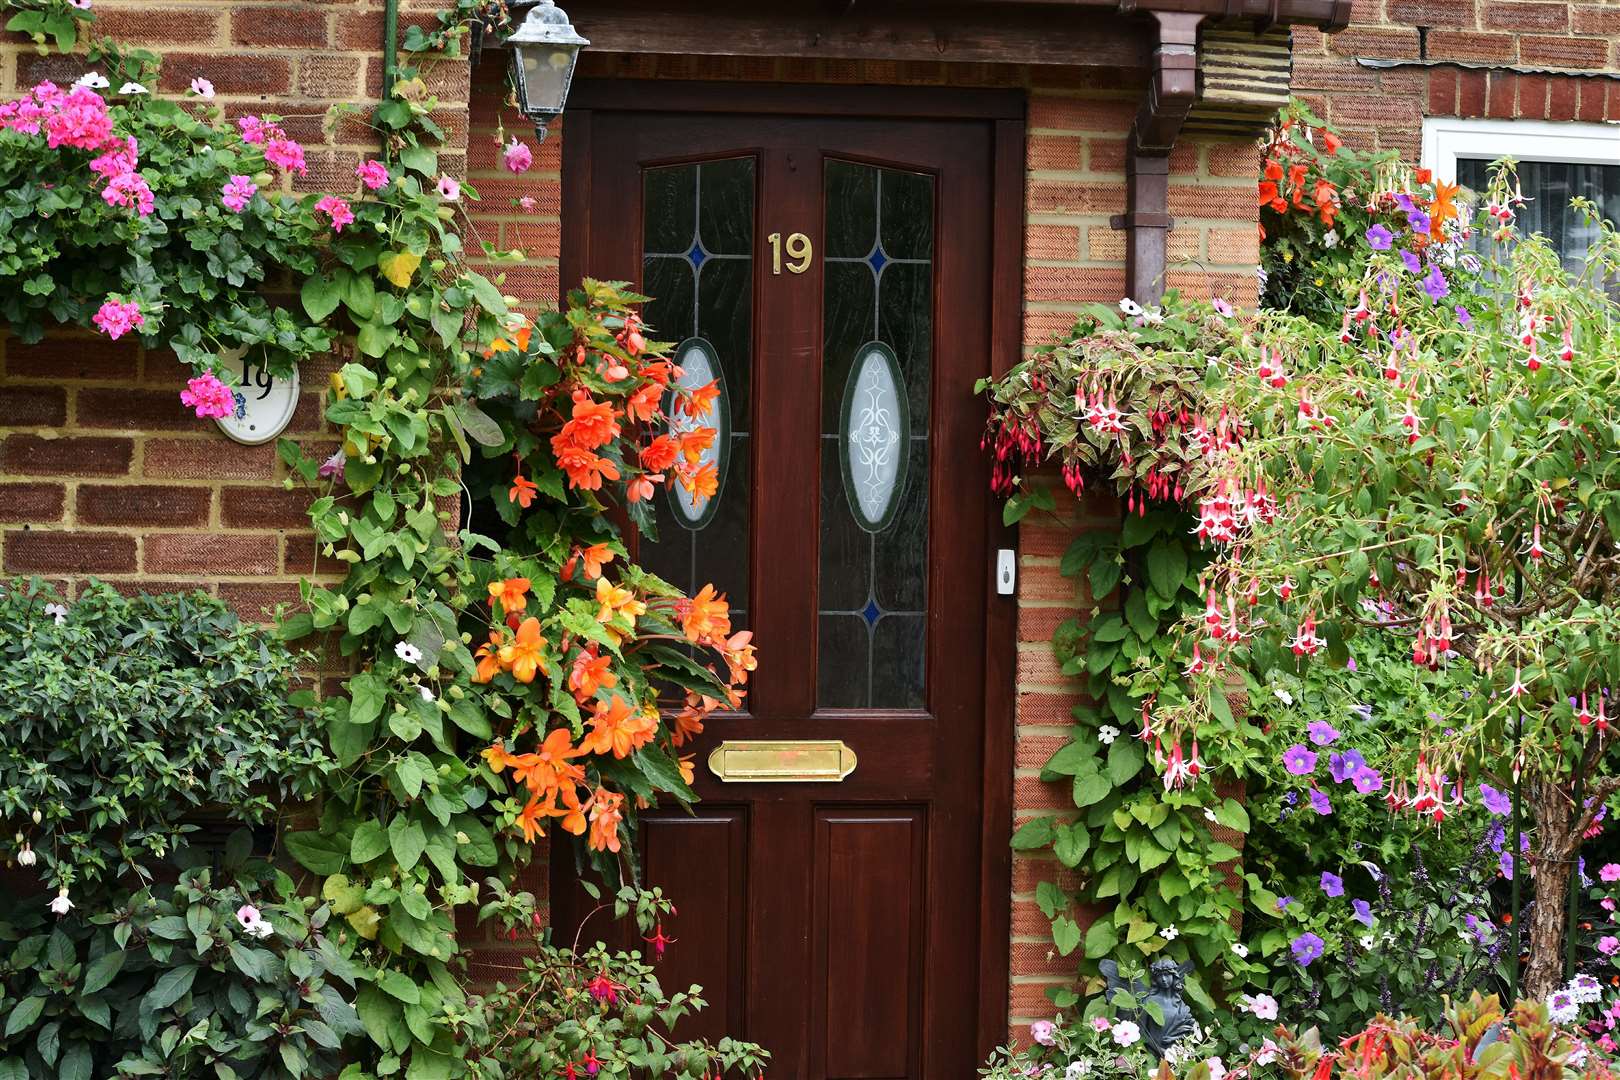 Use fragrant plants around pathways and entrances to provide a welcoming smell.